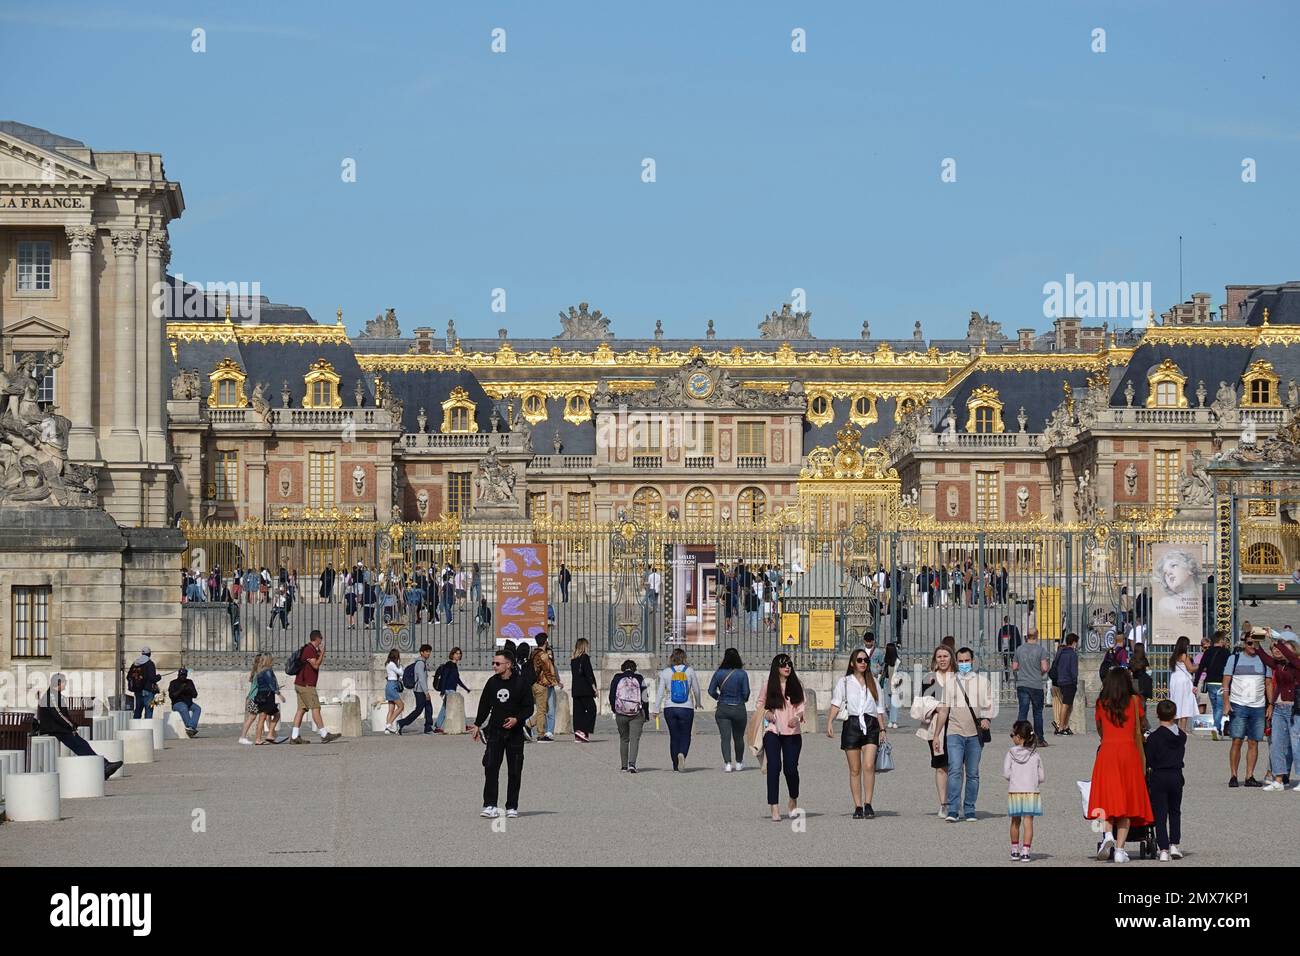 France, Versailles, Panorama picture of the famous Palace of Versailles near the golden royal gate where visitors are queuing at the entrance in the c Stock Photo